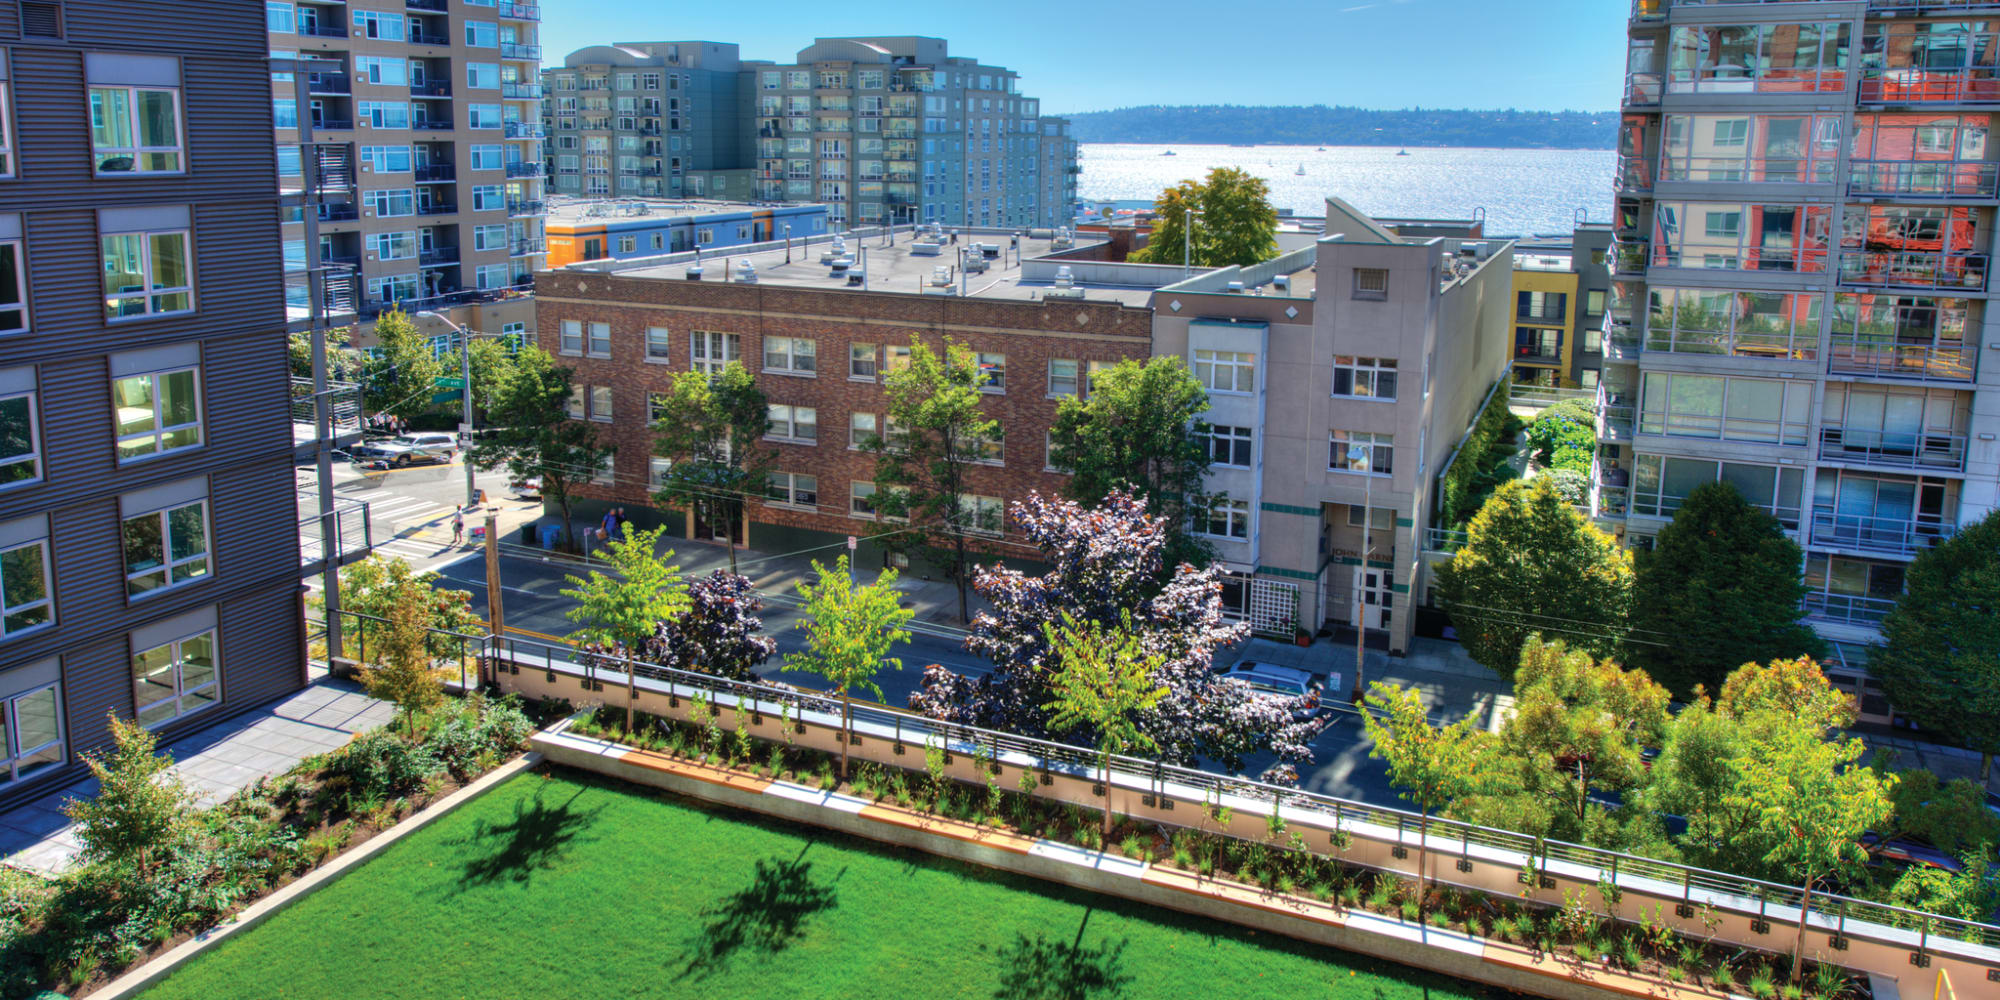 Apartments with city and ocean view at 2900 on First Apartments in Seattle, Washington